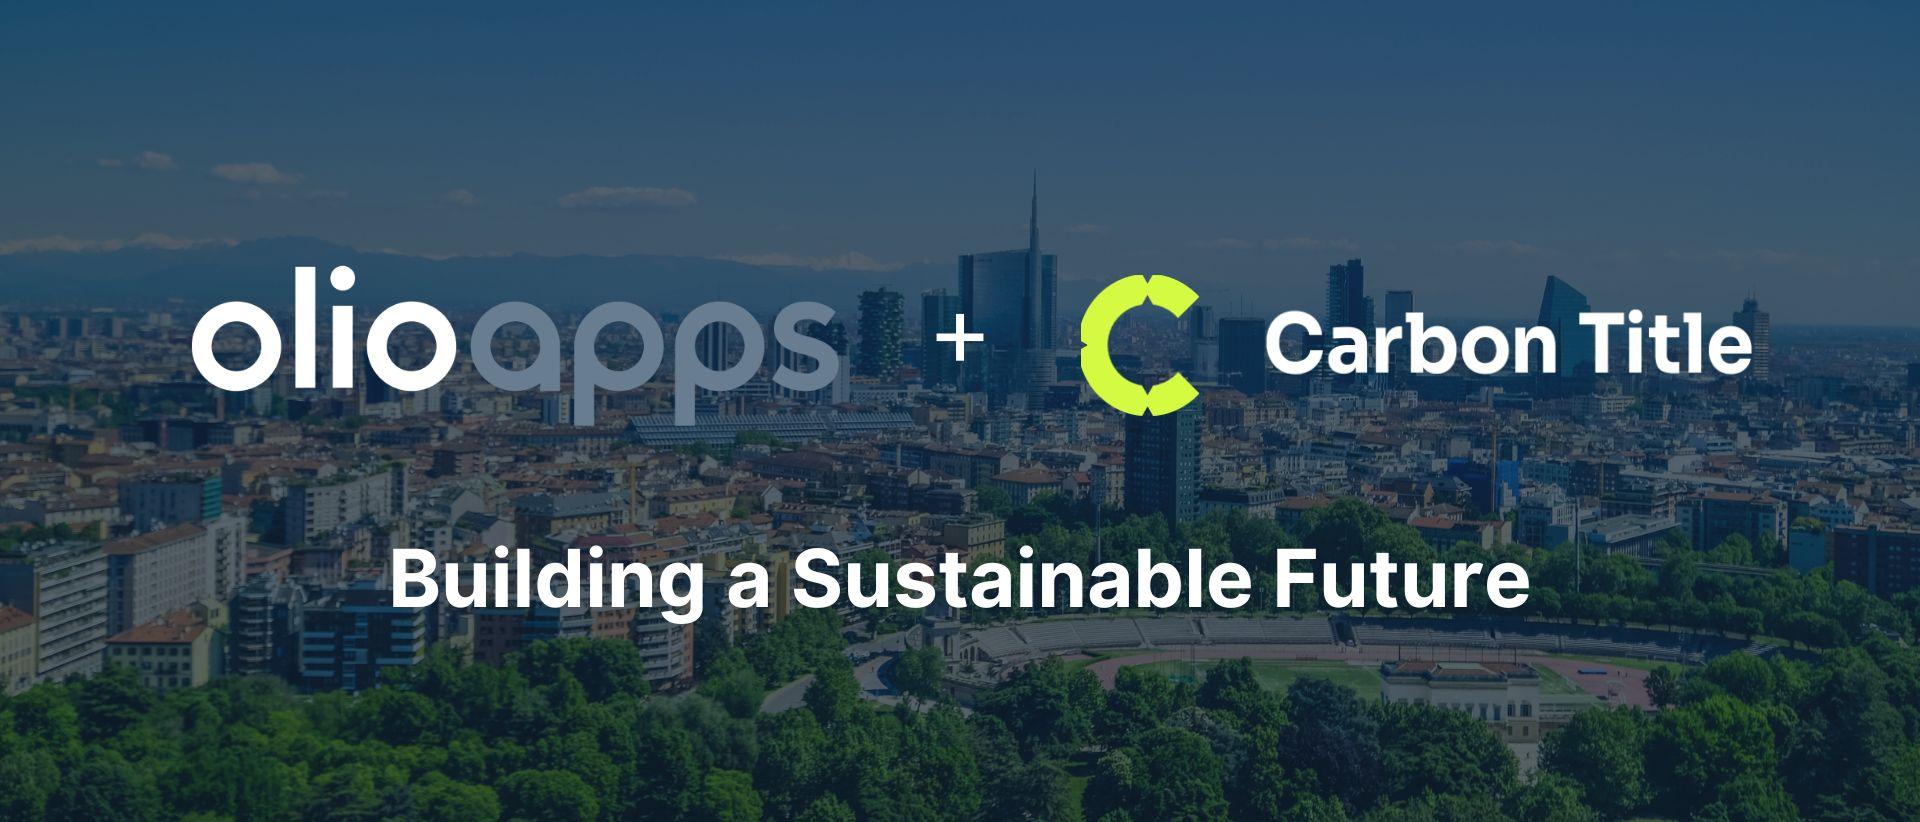 Olio Apps + Carbon Title: Building a Sustainable Future